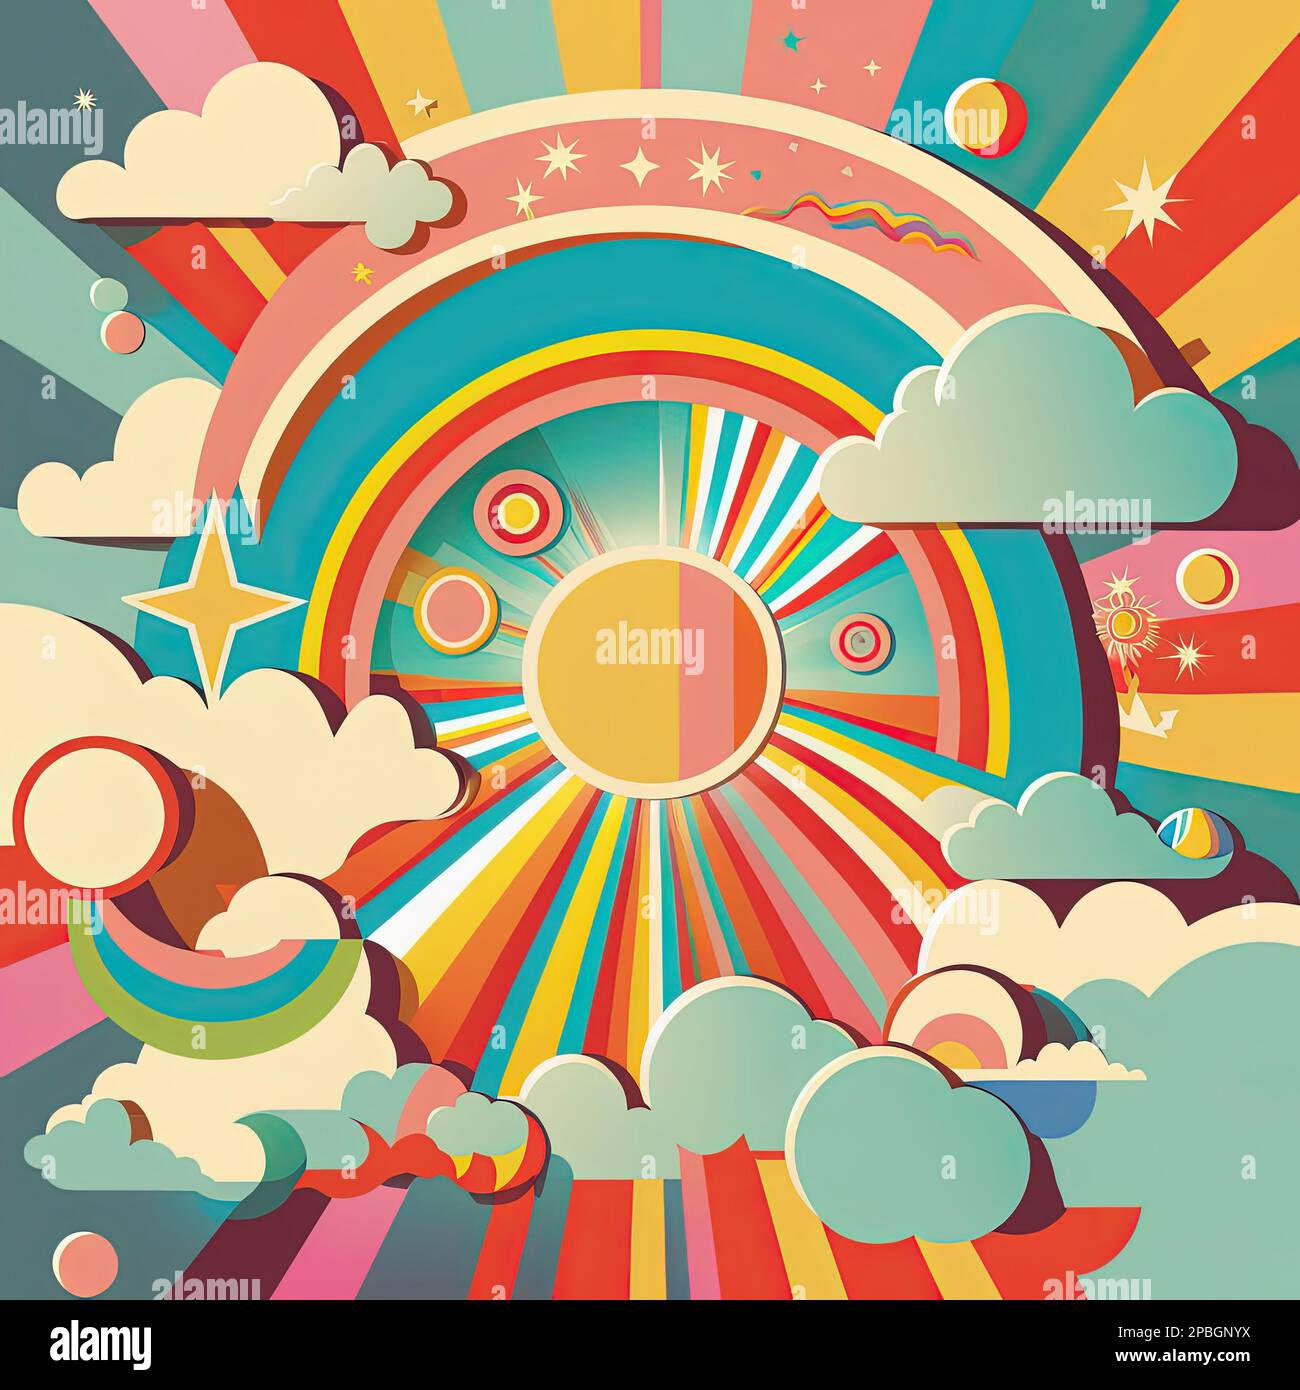 Retro 70s Groovy Backgrounds, Rainbows, Hippie Patterns PNG